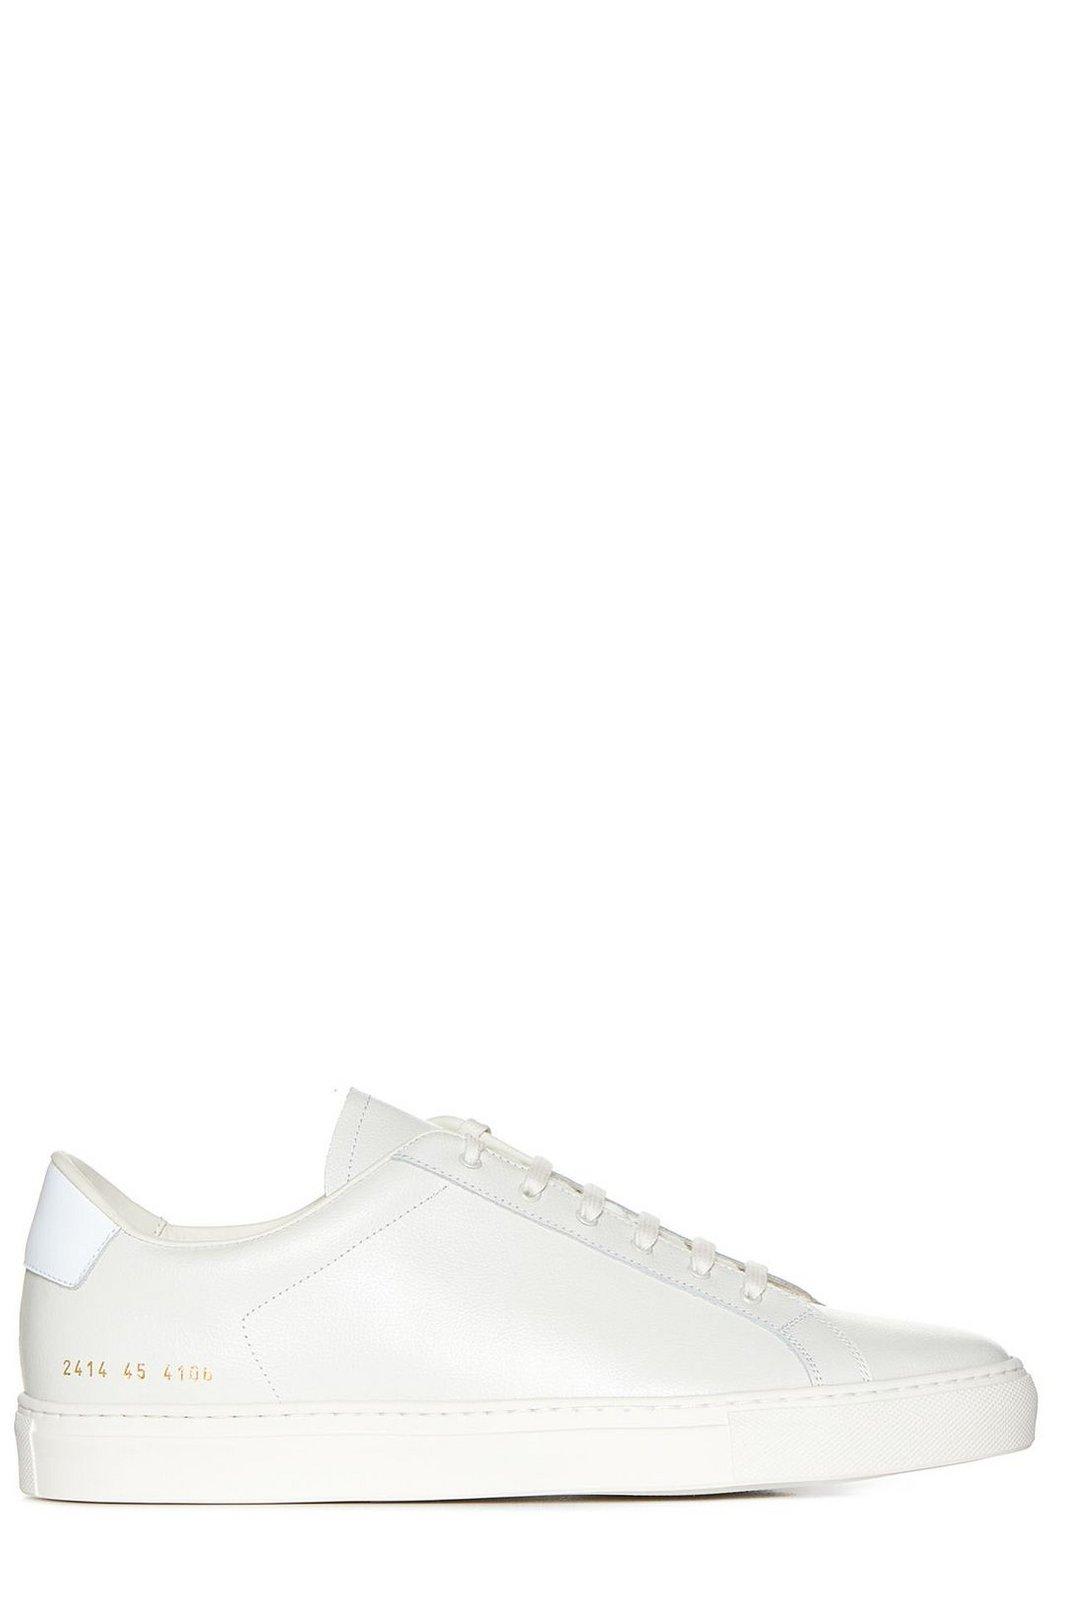 Shop Common Projects Retro Bumpy Sneakers In Vintage White White (white)